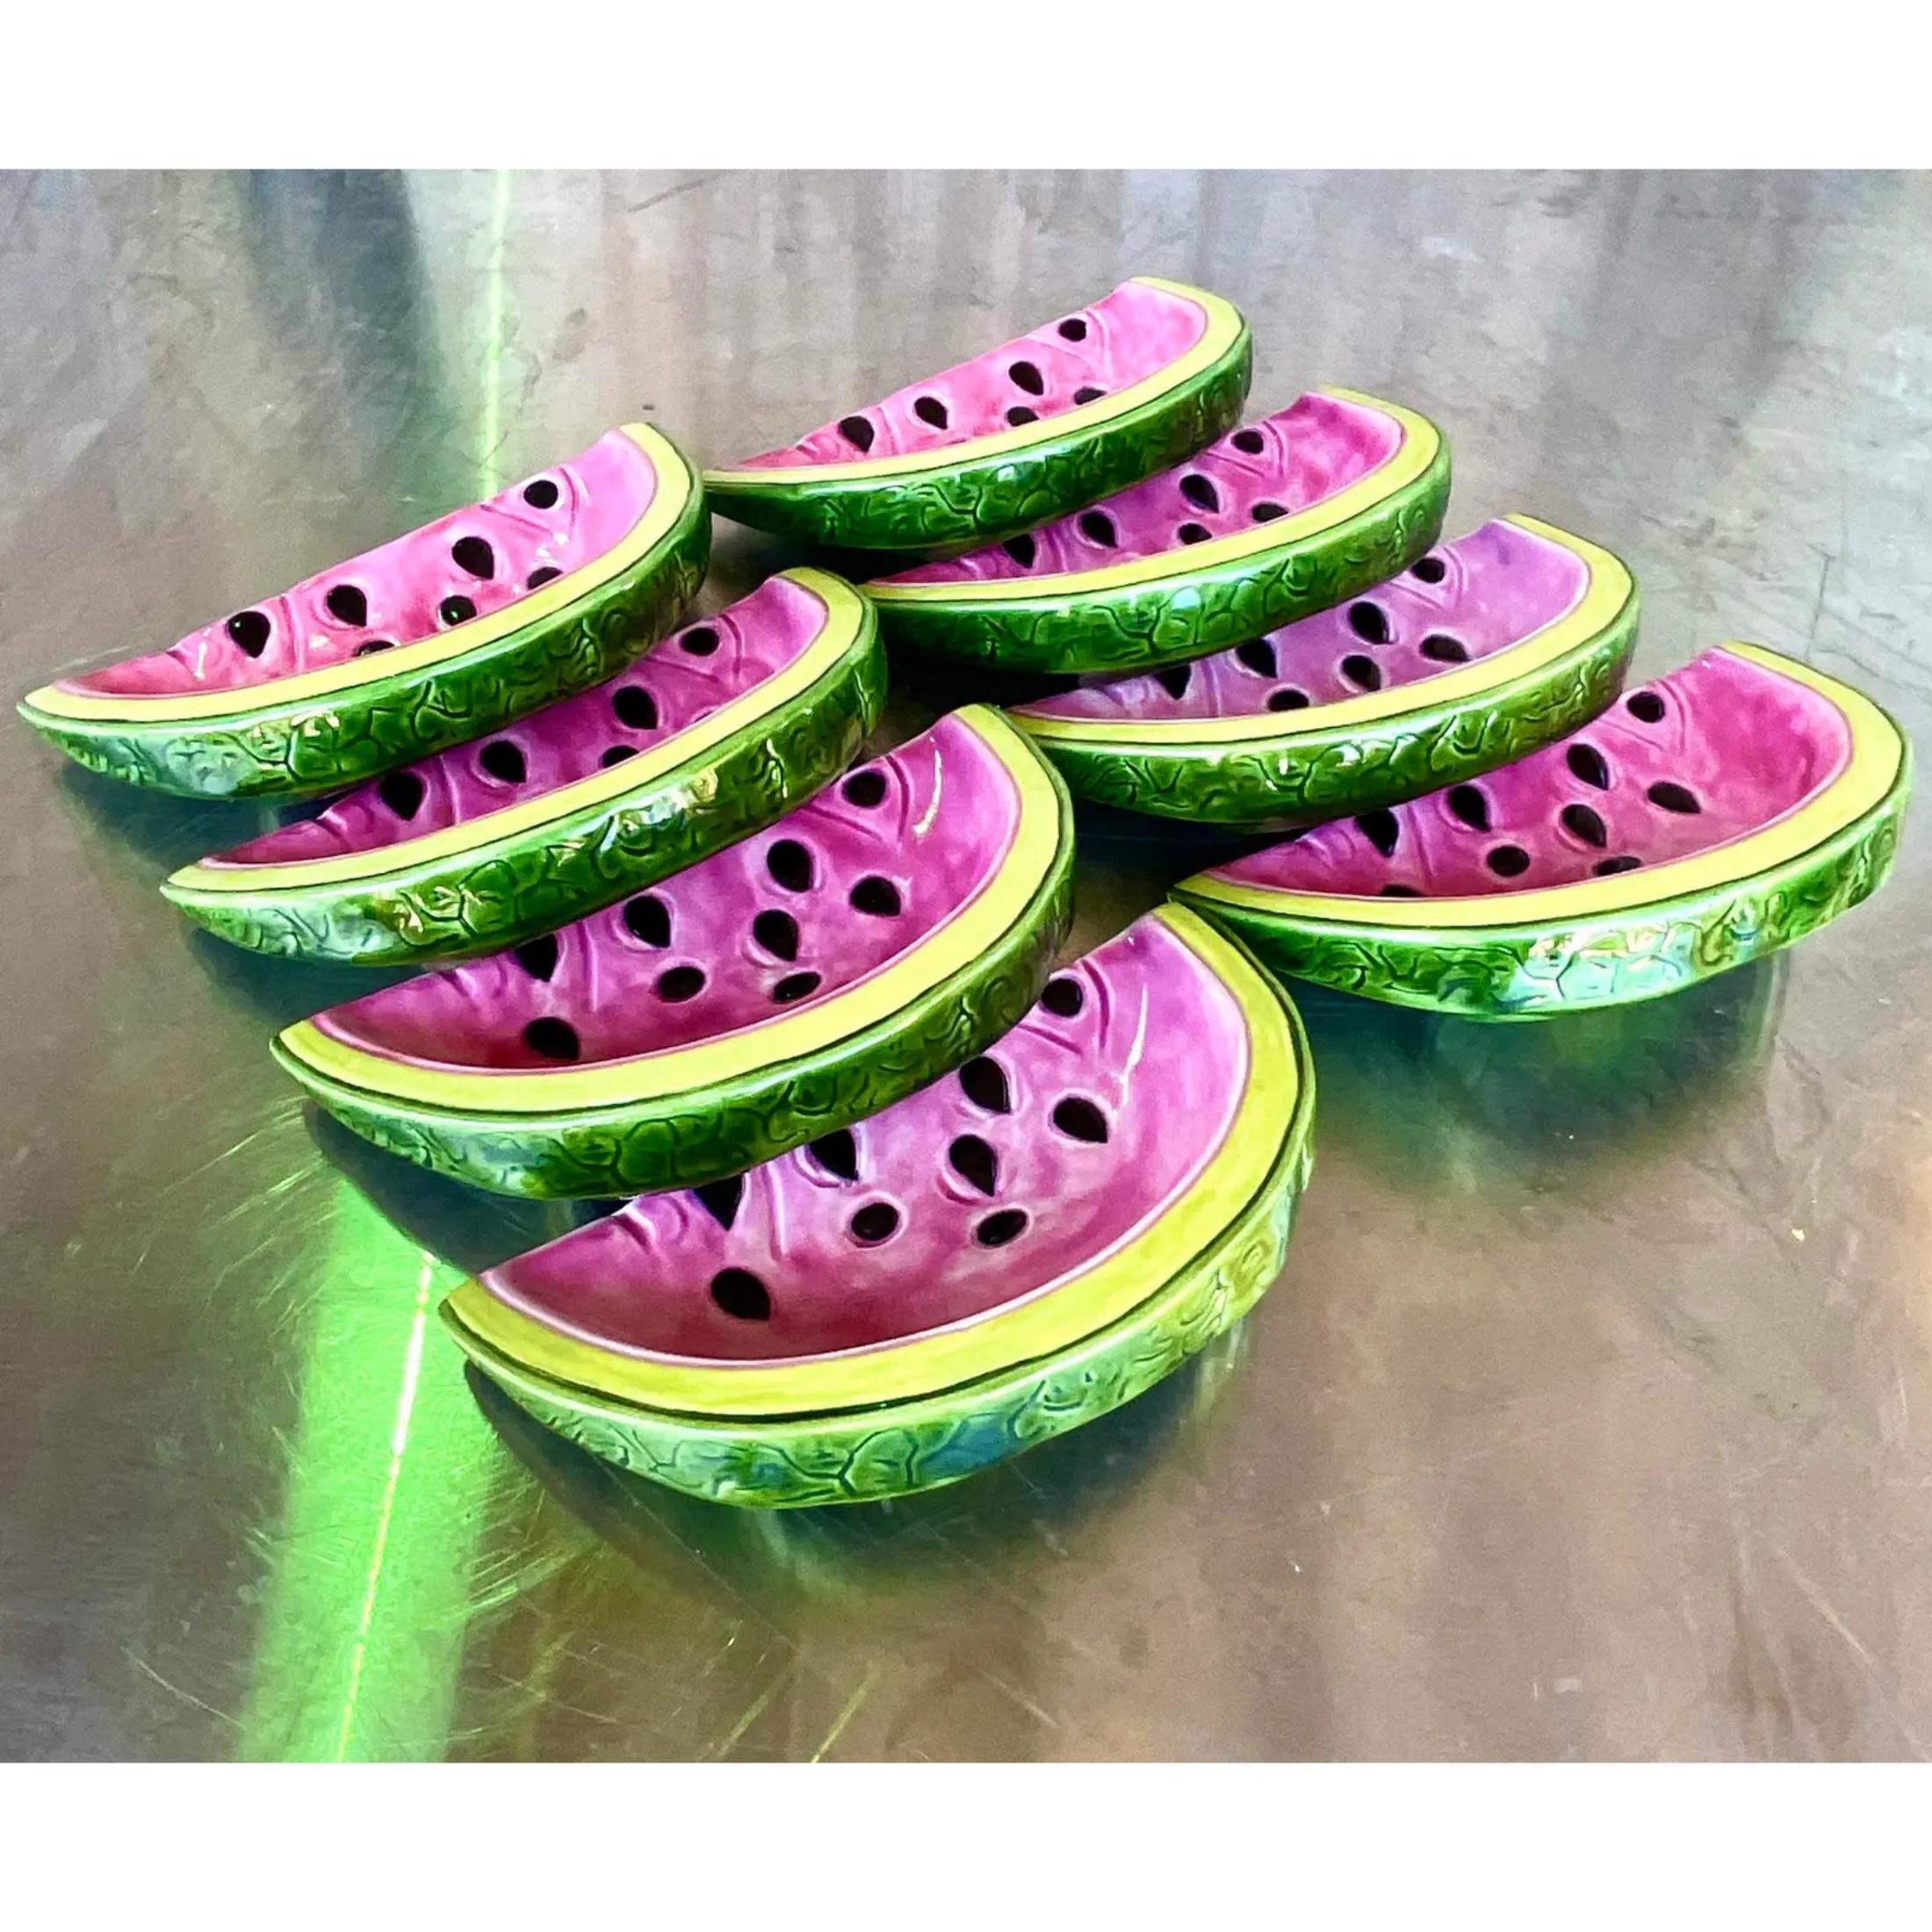 Fantastic set of 8 hand painted luncheon plates. A charming watermelon slice perfect for your summer get together. Brilliant colors with a glazed ceramic finish. Signed on the bottom. Acquired from a Palm Beach estate